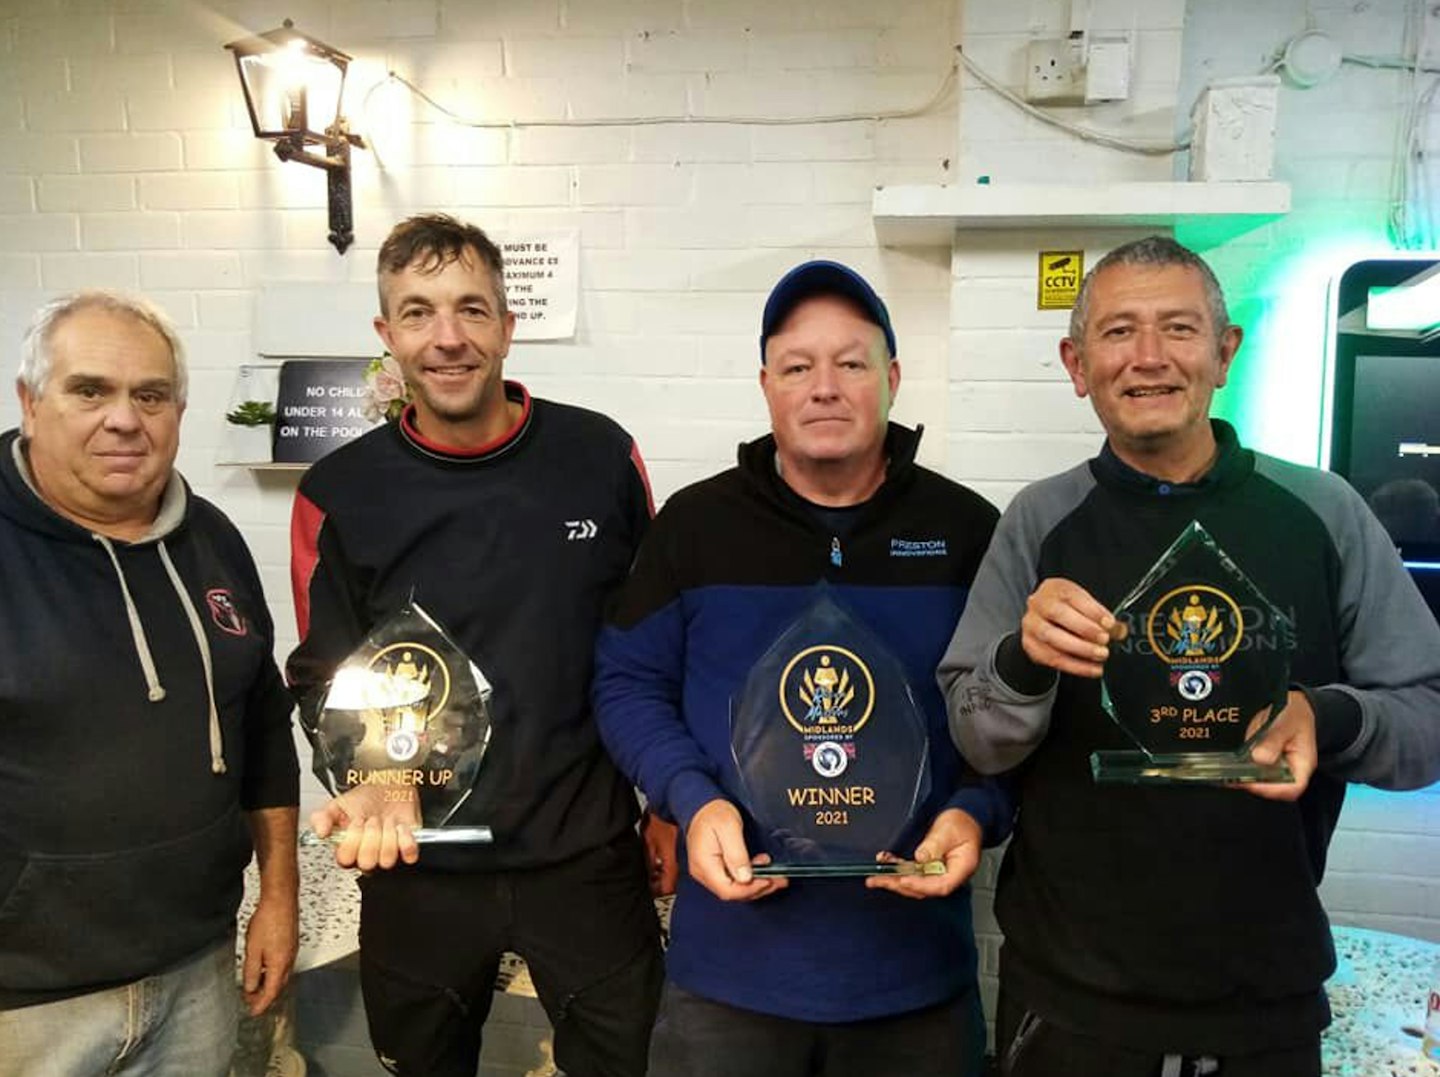 Pictured from left to right are ABC Baits boss Denzil Thorpe, Hadrian Whittle, Mark  Beard and Tony Moreton